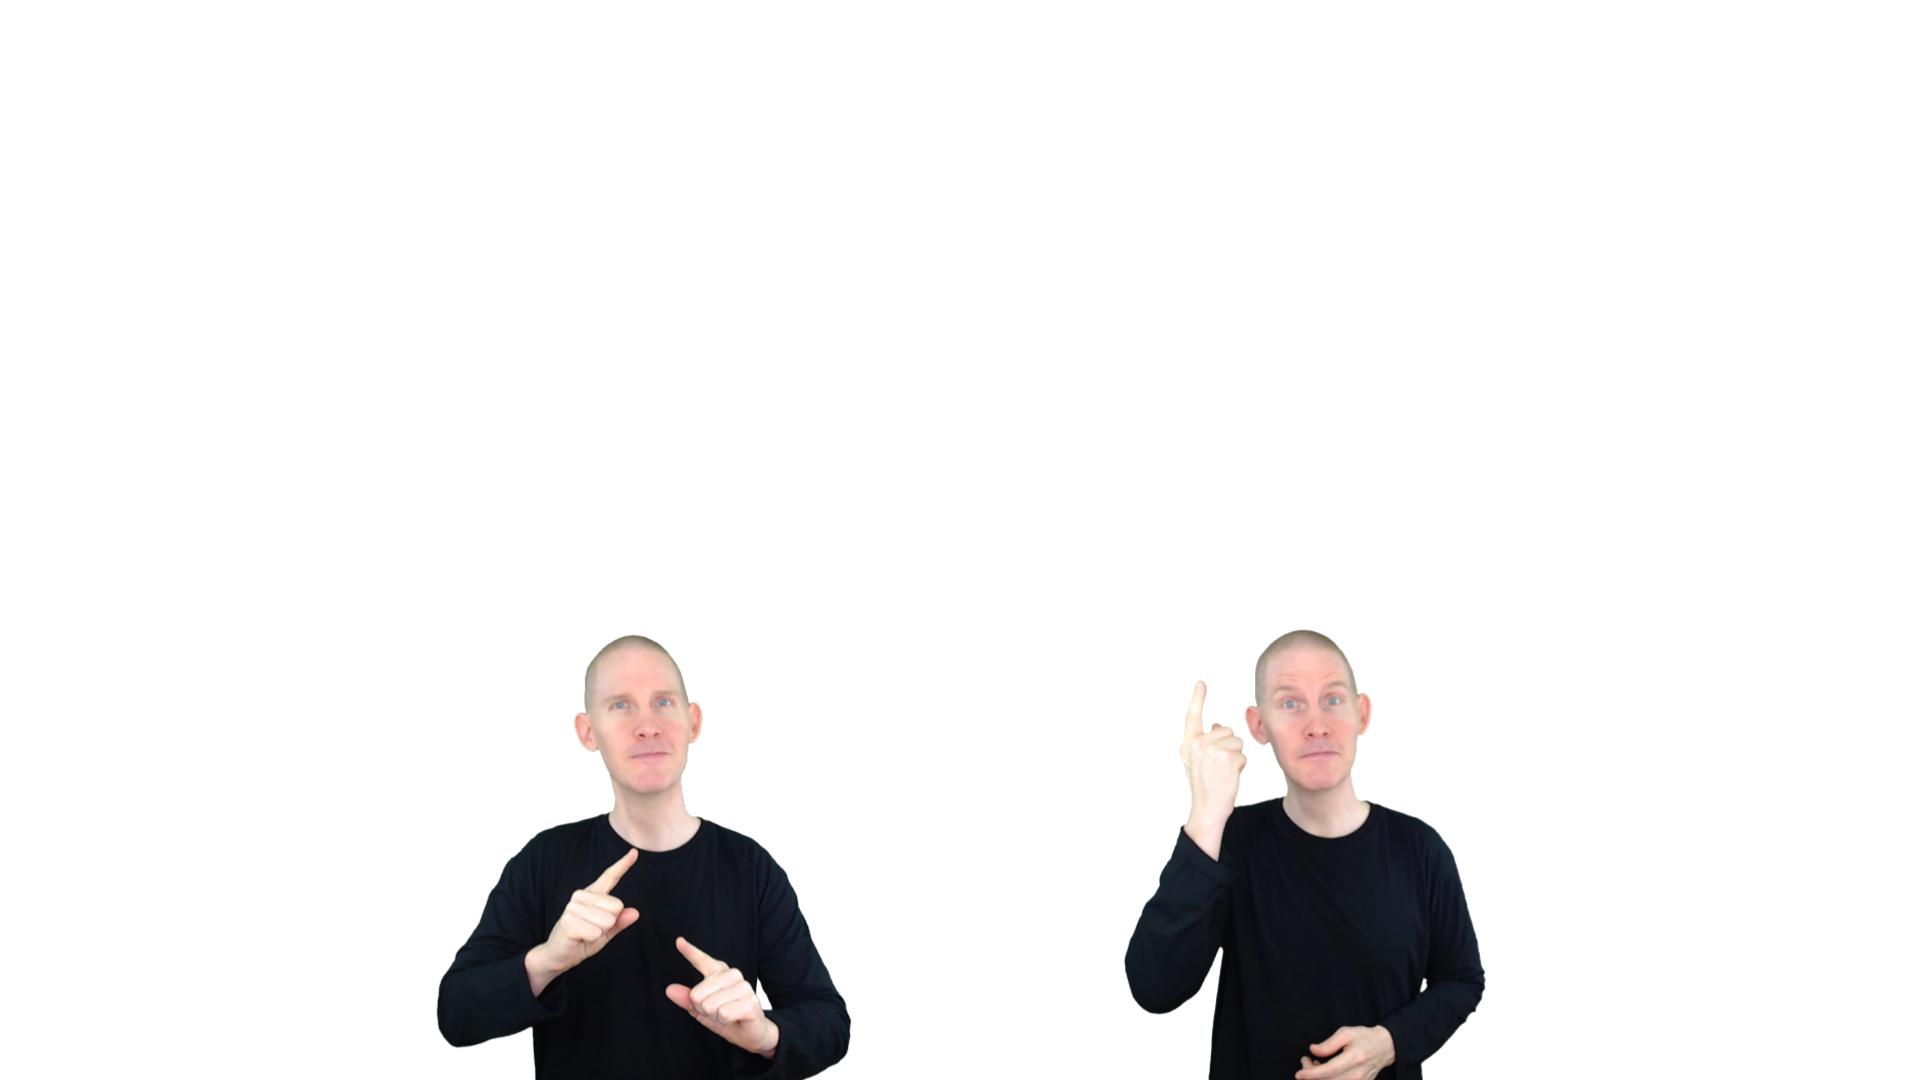 One-Word Questions in American Sign Language - dummies